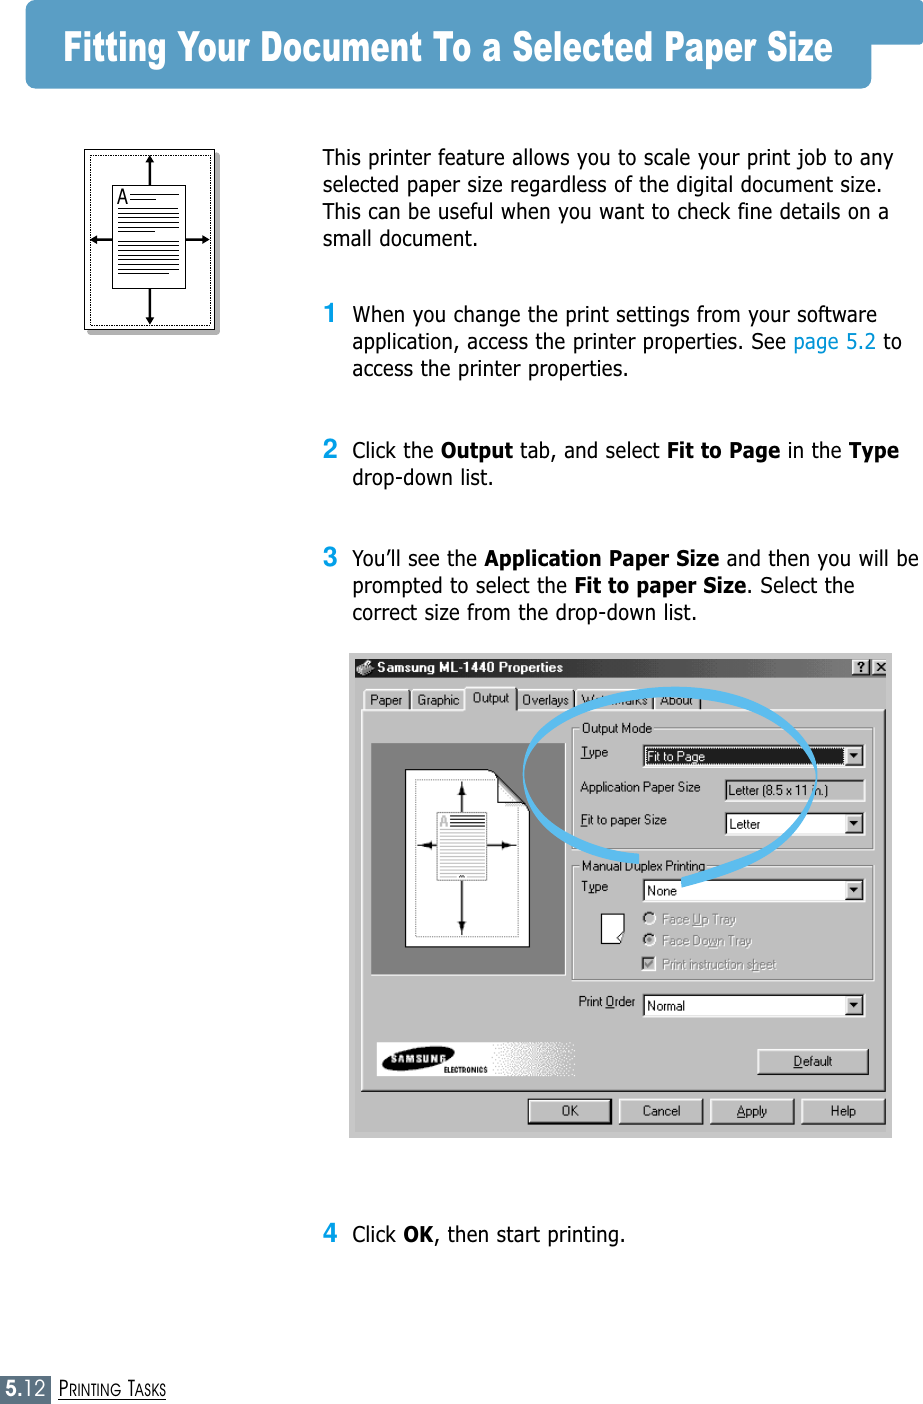 5.12PRINTING TASKSFitting Your Document To a Selected Paper SizeThis printer feature allows you to scale your print job to anyselected paper size regardless of the digital document size.This can be useful when you want to check fine details on asmall document. 1When you change the print settings from your softwareapplication, access the printer properties. See page 5.2 toaccess the printer properties.2Click the Output tab, and select Fit to Page in the Typedrop-down list. 3You’ll see the Application Paper Size and then you will beprompted to select the Fit to paper Size. Select thecorrect size from the drop-down list.4Click OK, then start printing.A